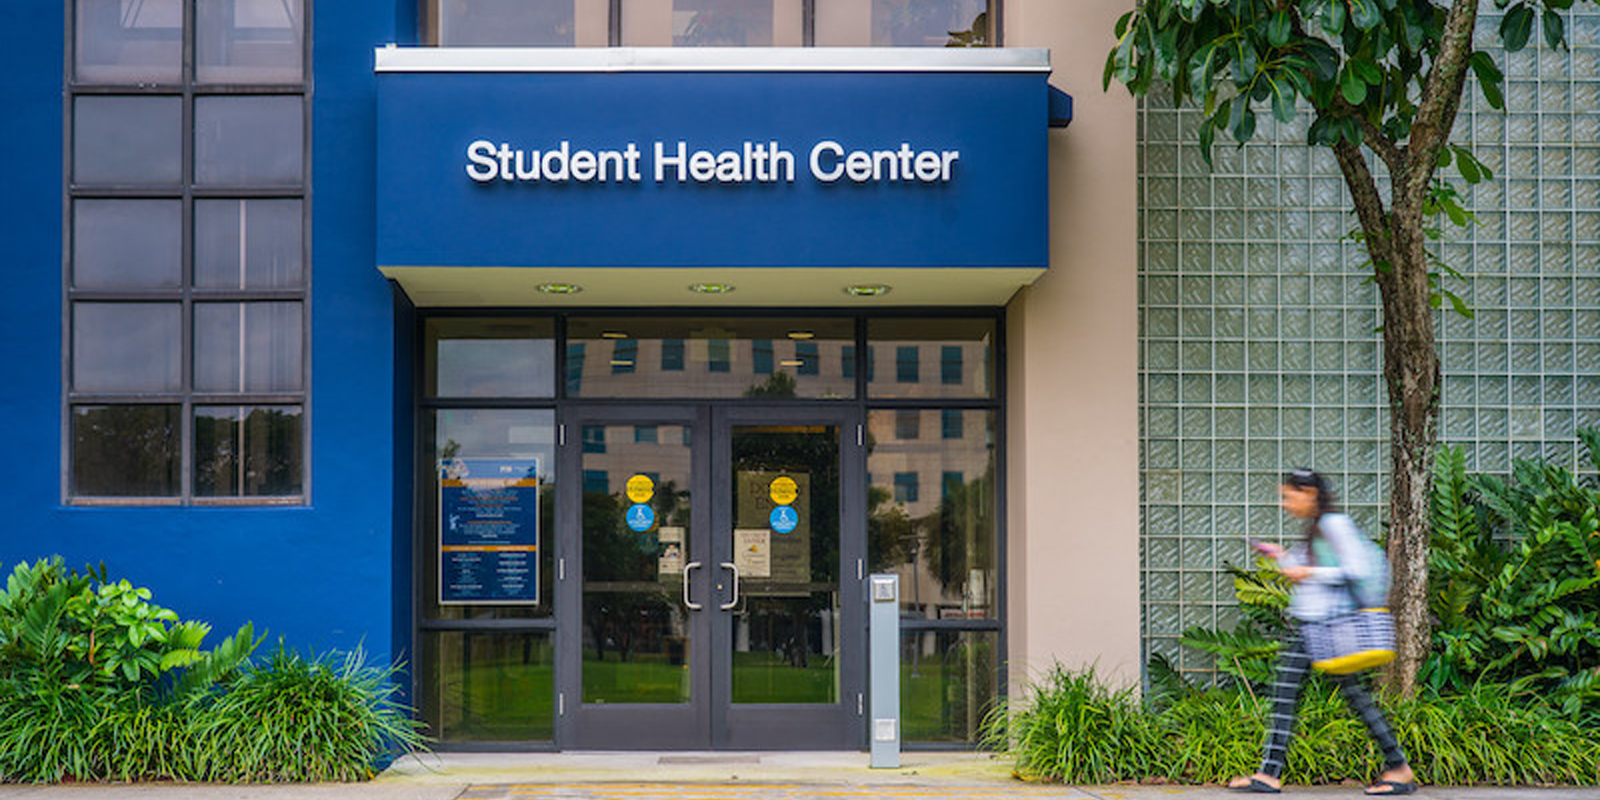 Front doors of the Student Health Center at FIU